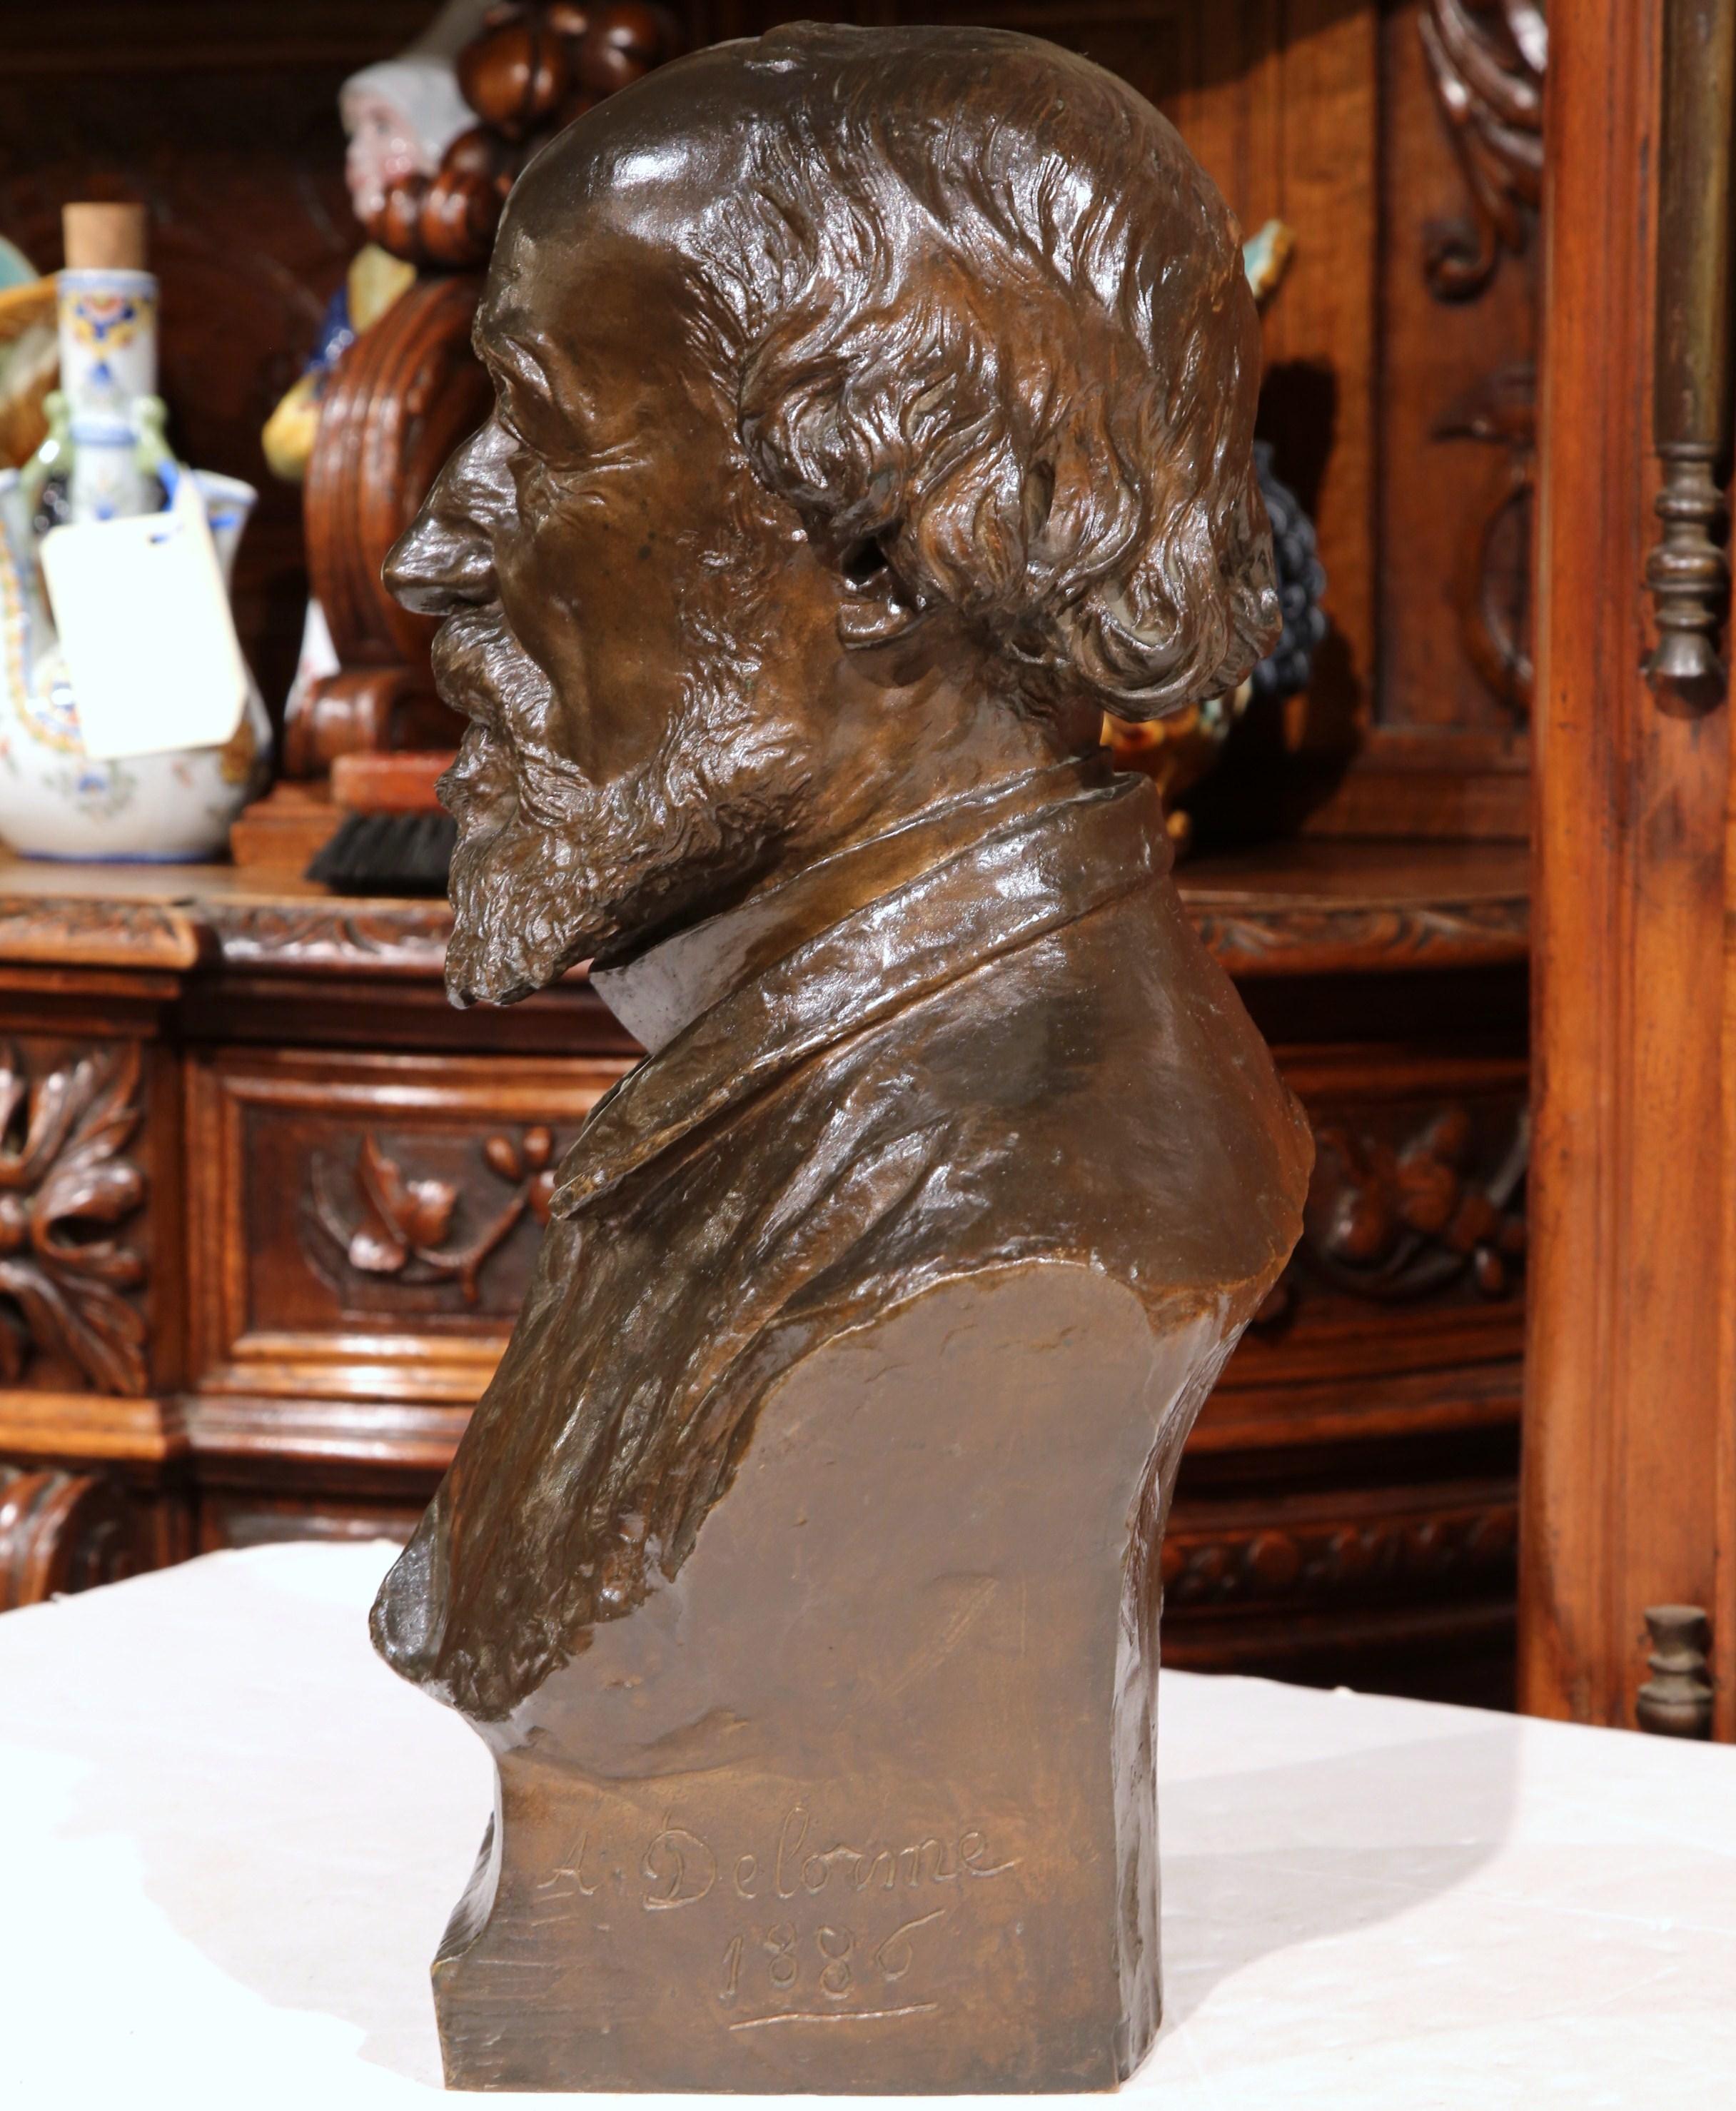 This elegant bronze bust was created in Paris, France. The masculine, figural sculpture depicts the face of a French politician; it is signed and dated on the side by French sculptor A. Delorme, 1886 with foundry's name engraved in the back: Gruet,